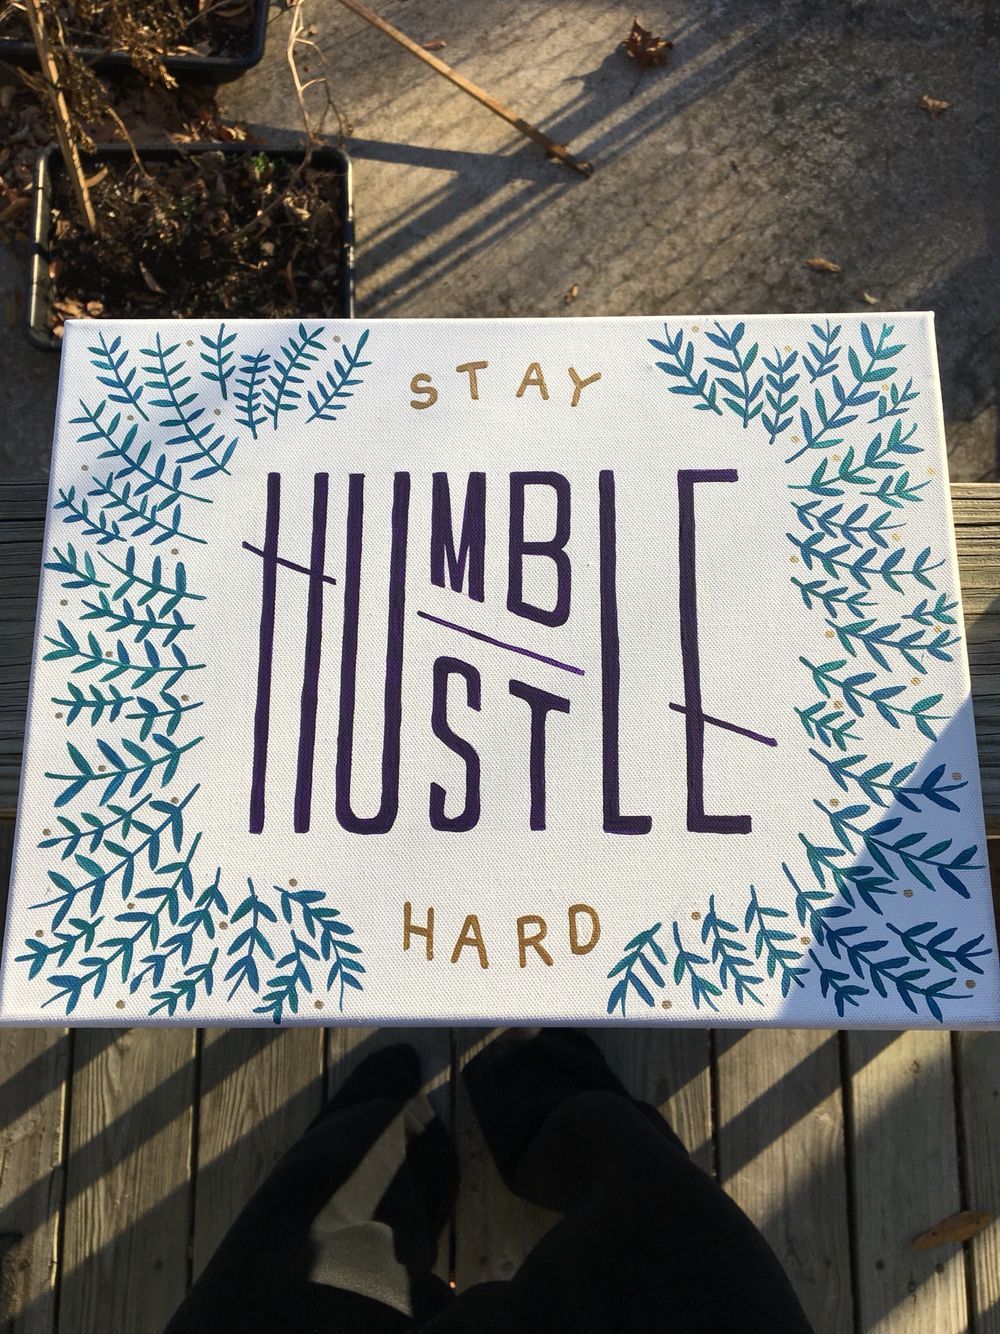 Stay humble, hustle hard. Acrylic painting on canvas.